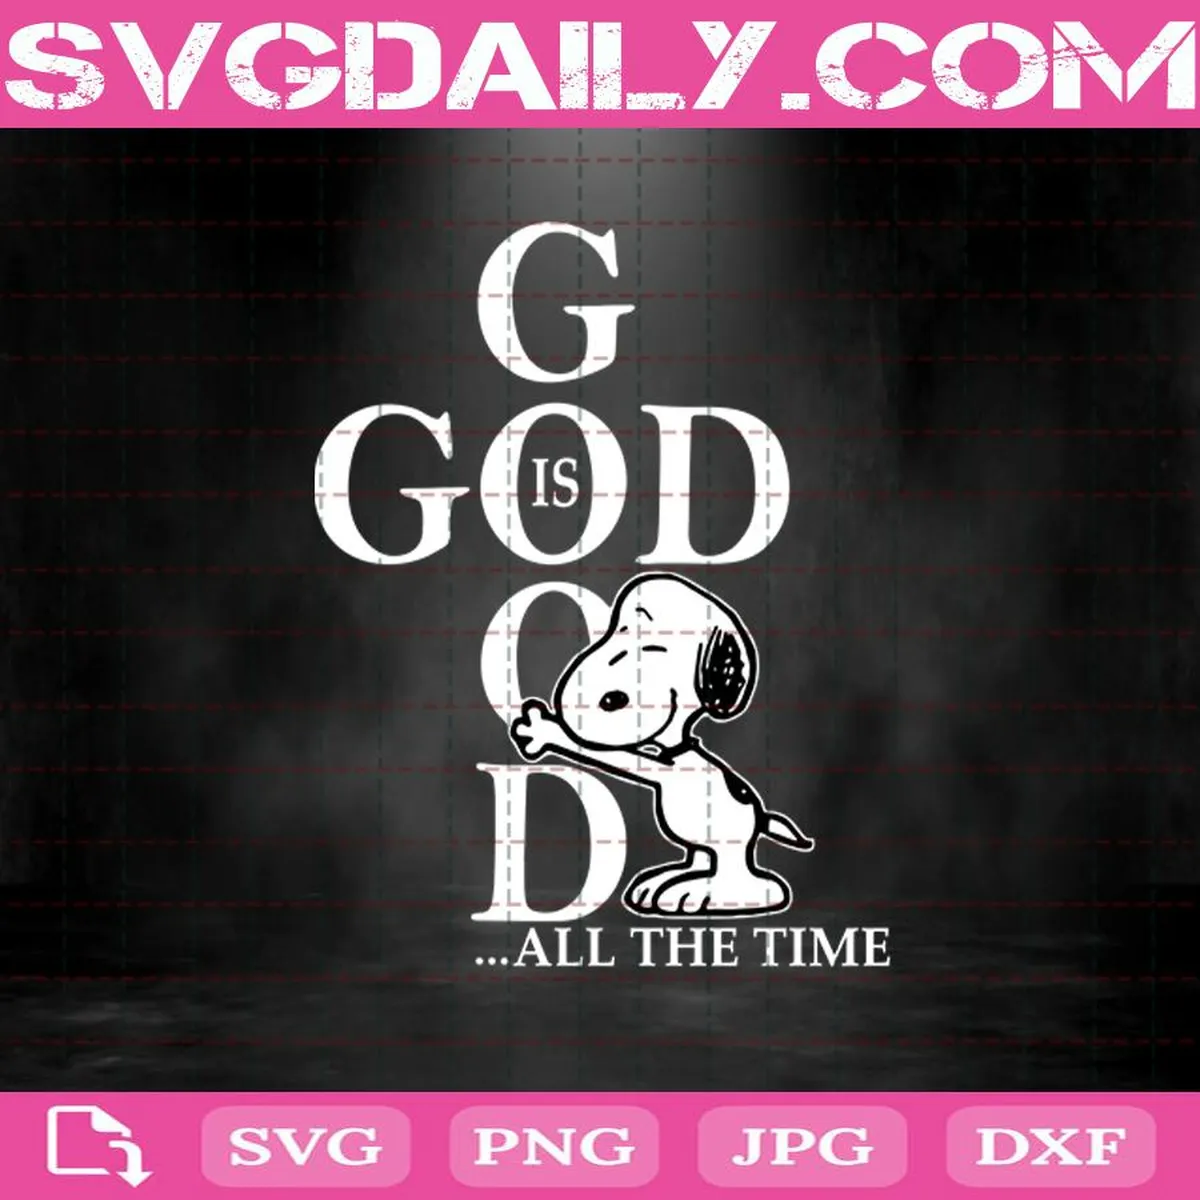 Snoopy God Is Good All The Time Svg, Snoopy Svg, Cute Snoopy Svg, Snoopy Lovers Svg, Snoopy Love Jesus Svg